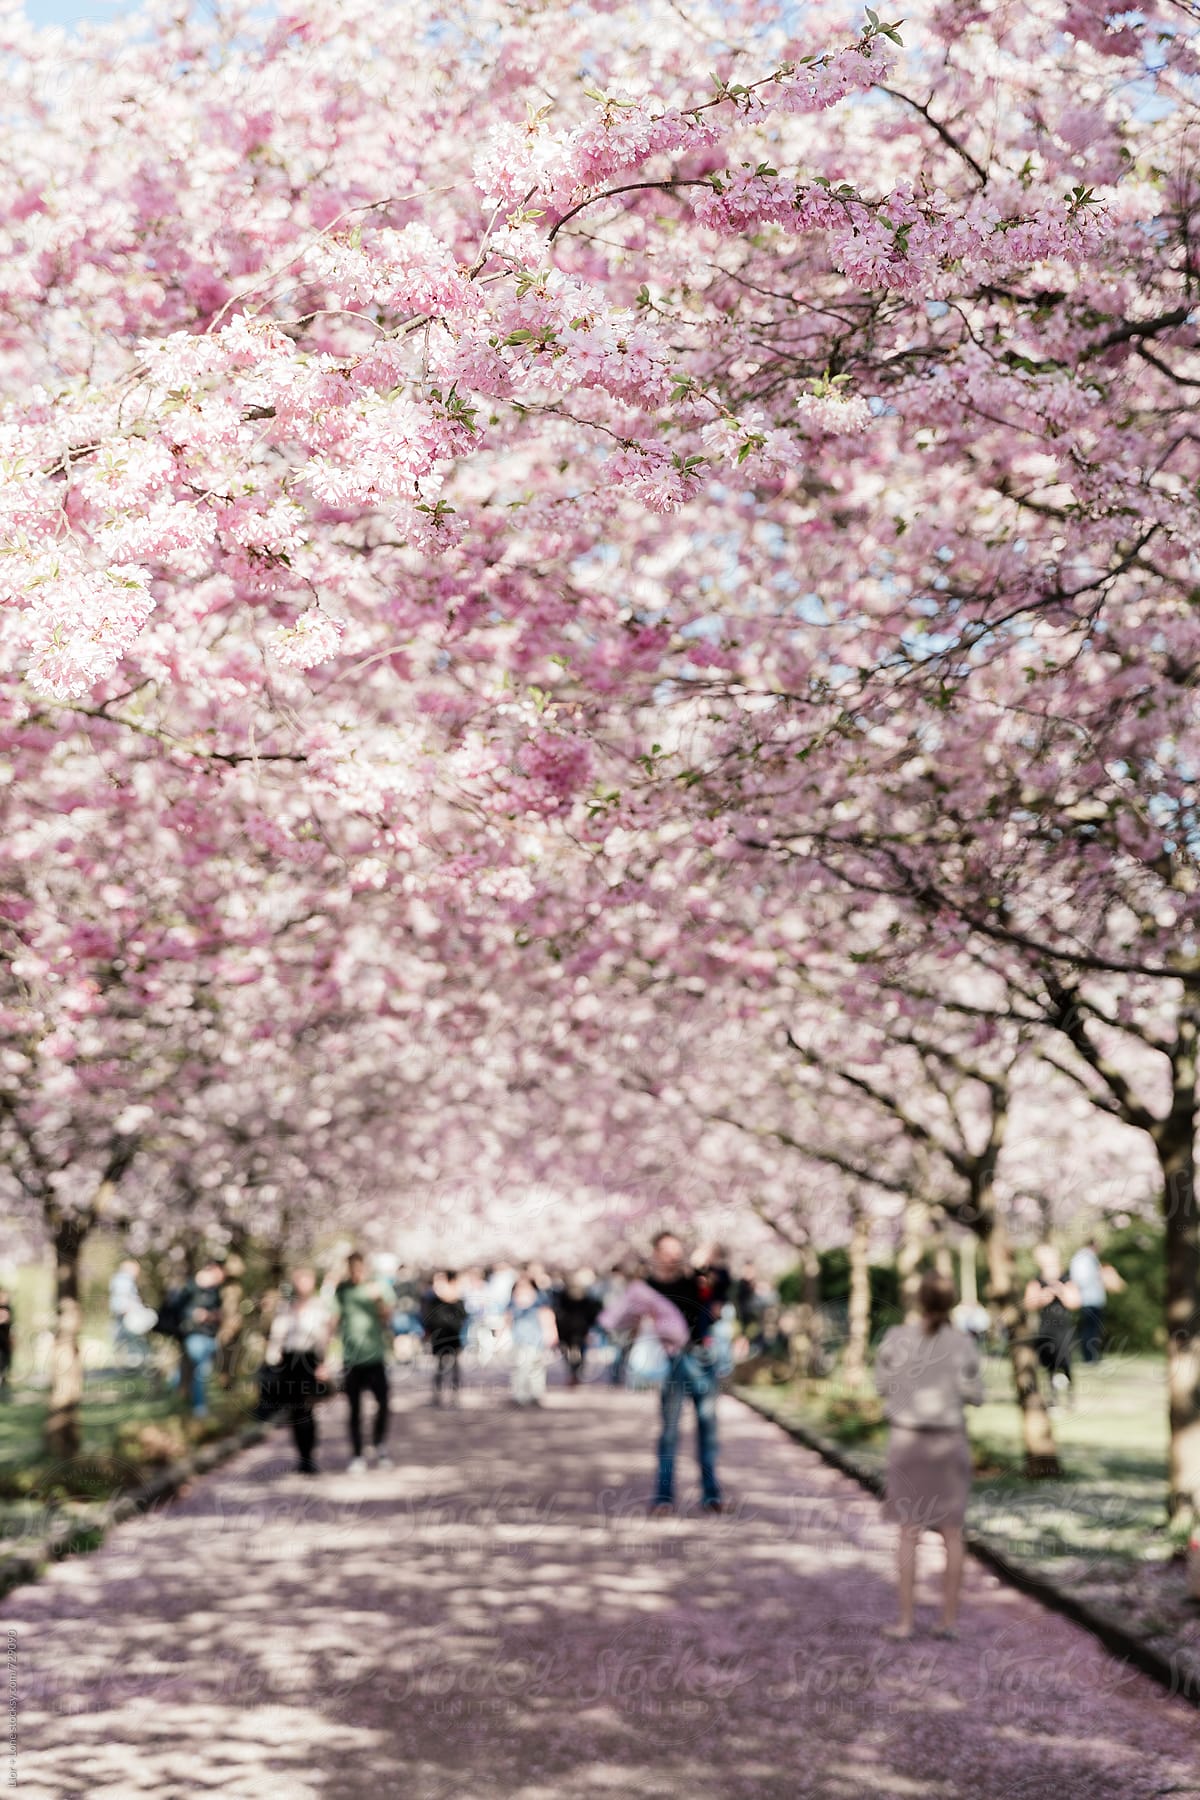 Blurry people walking on a path under cherry trees